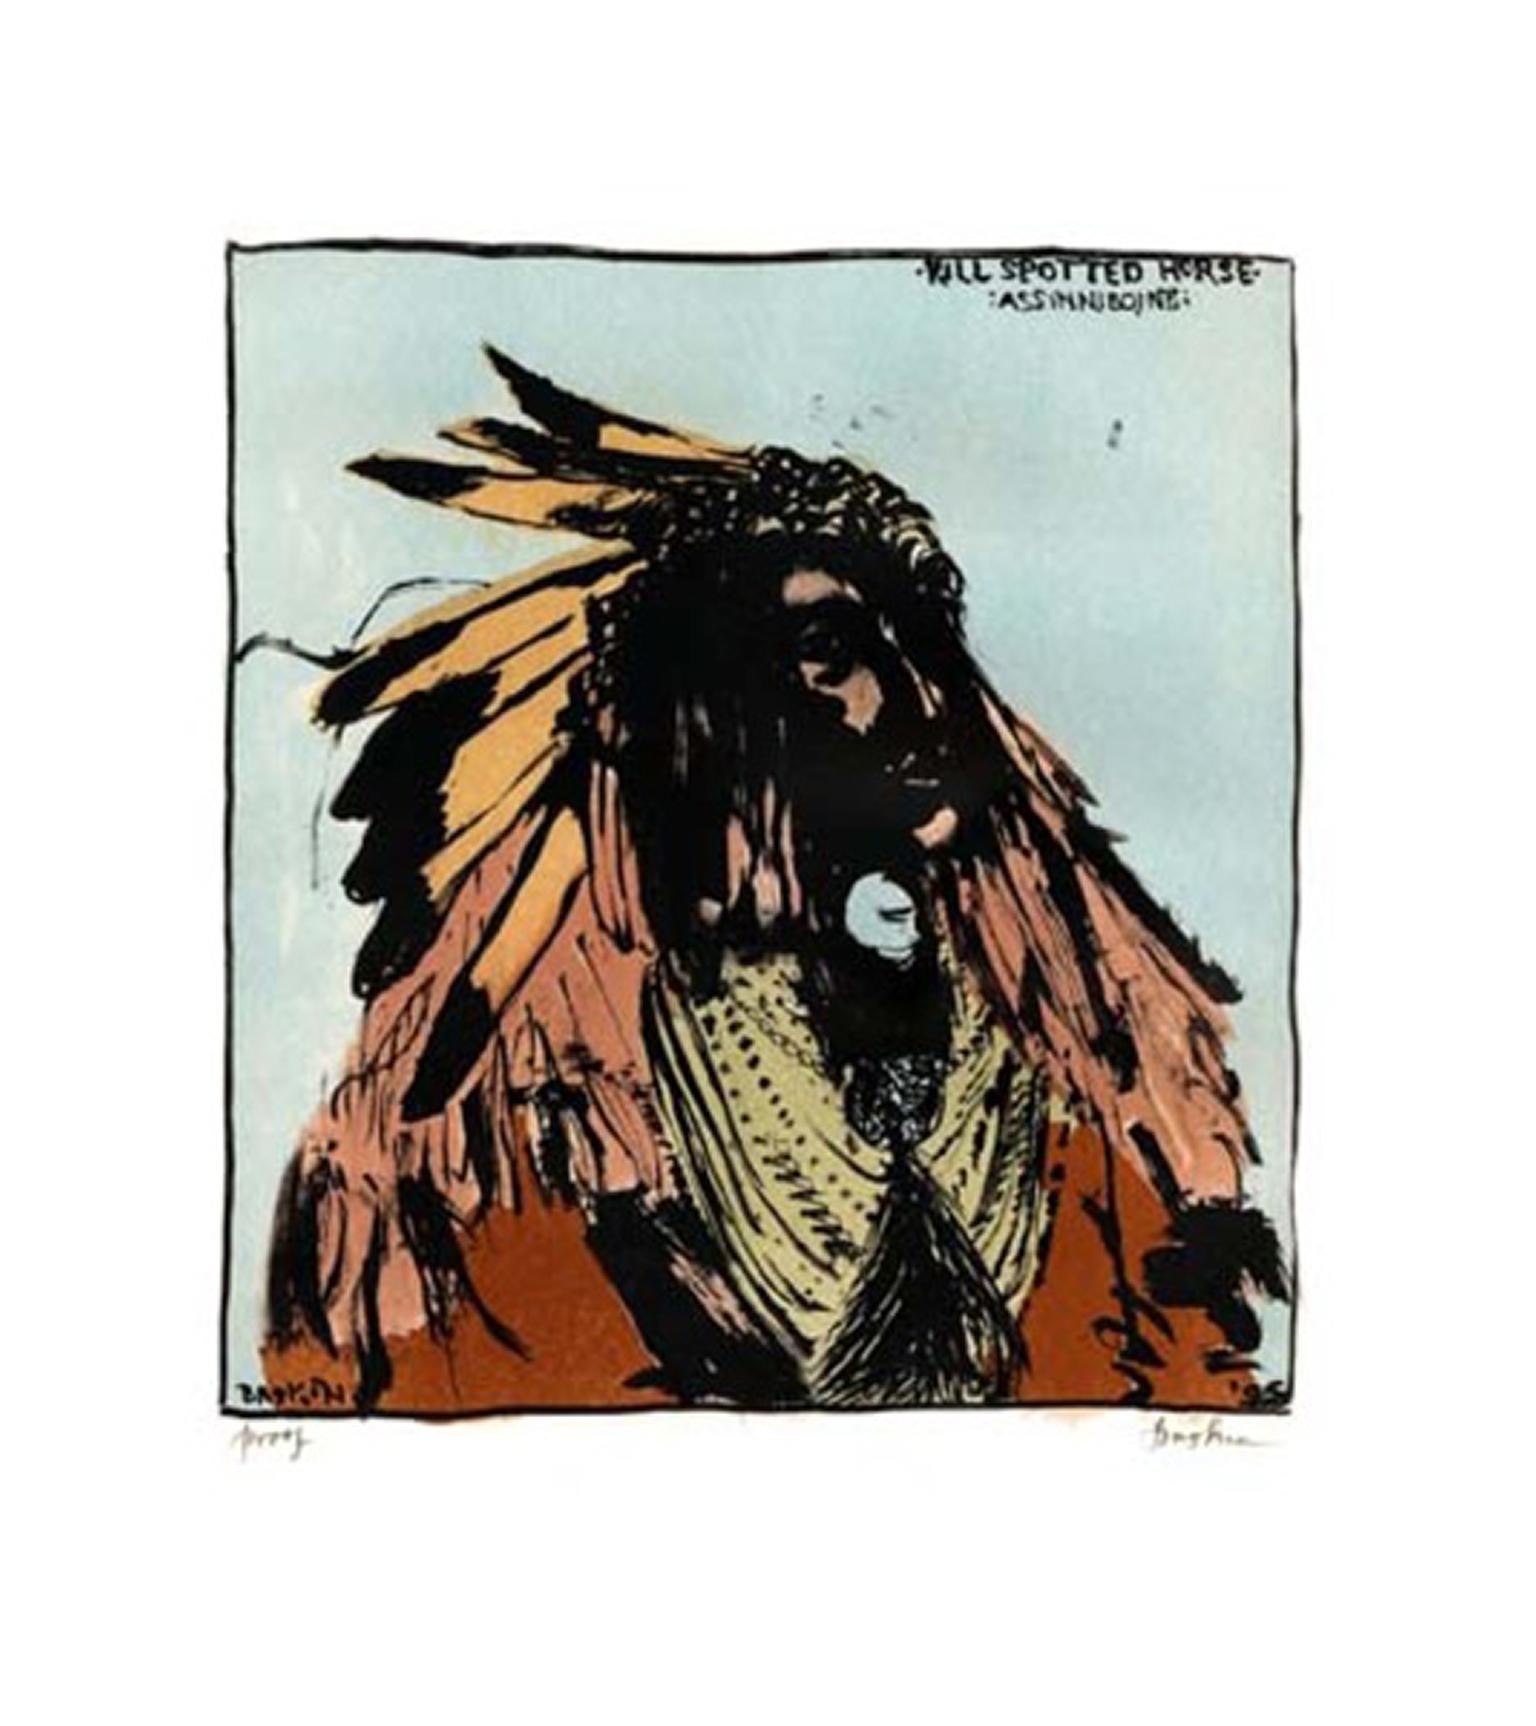 " Kill Spotted Horse-Assinniboine" is an Original color lithograph by Leonard Baskin. This is a signed artists proof. The subject is of a portrait by Frank Albert Rinehart who, with his assistant Adolph Muhr, photographed Native Americans at the